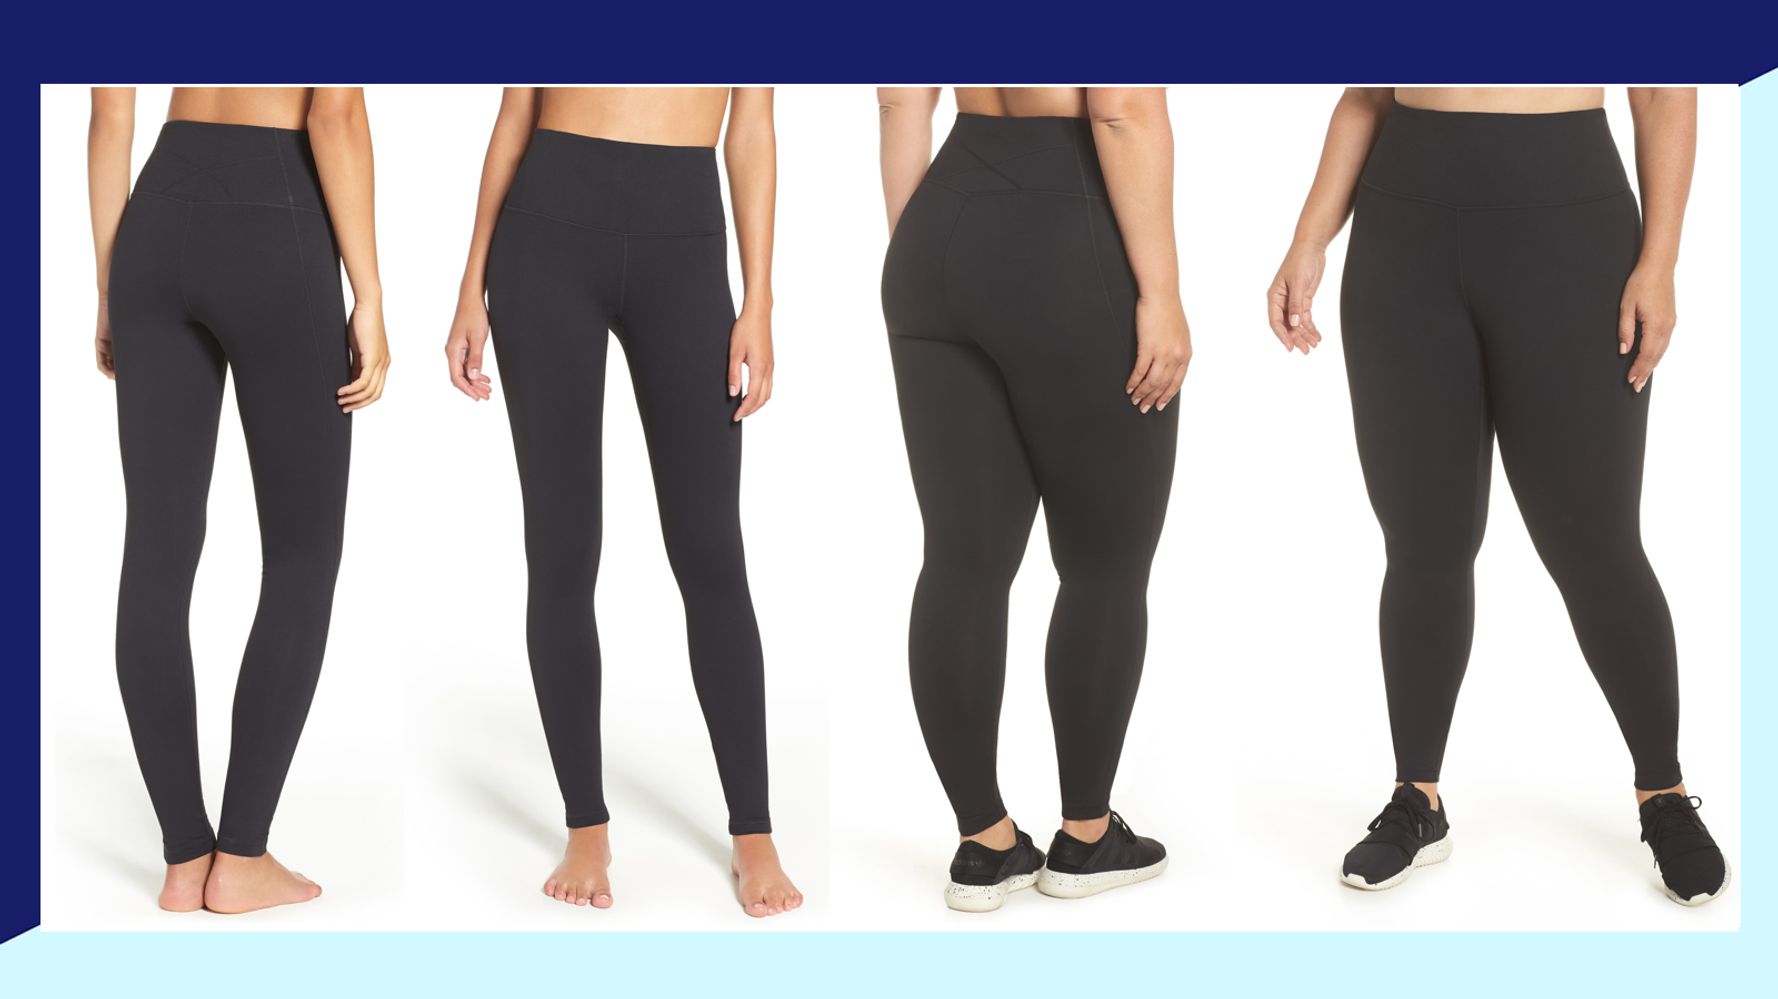 FYI, Nordstrom Shoppers' Favorite High-Waist Leggings Are $20 Off